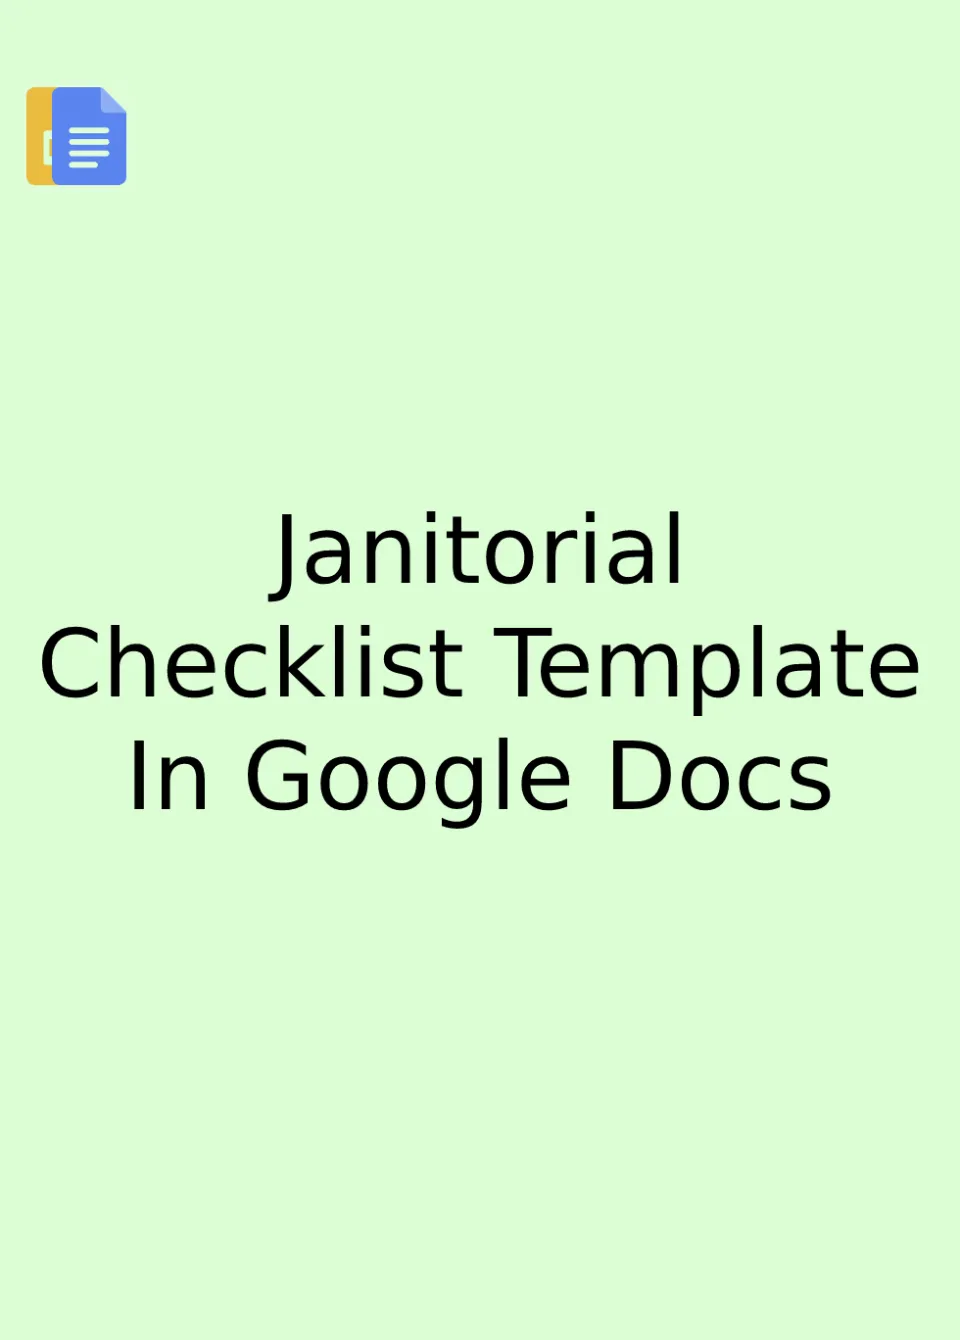 Janitorial Checklist Template Google Docs